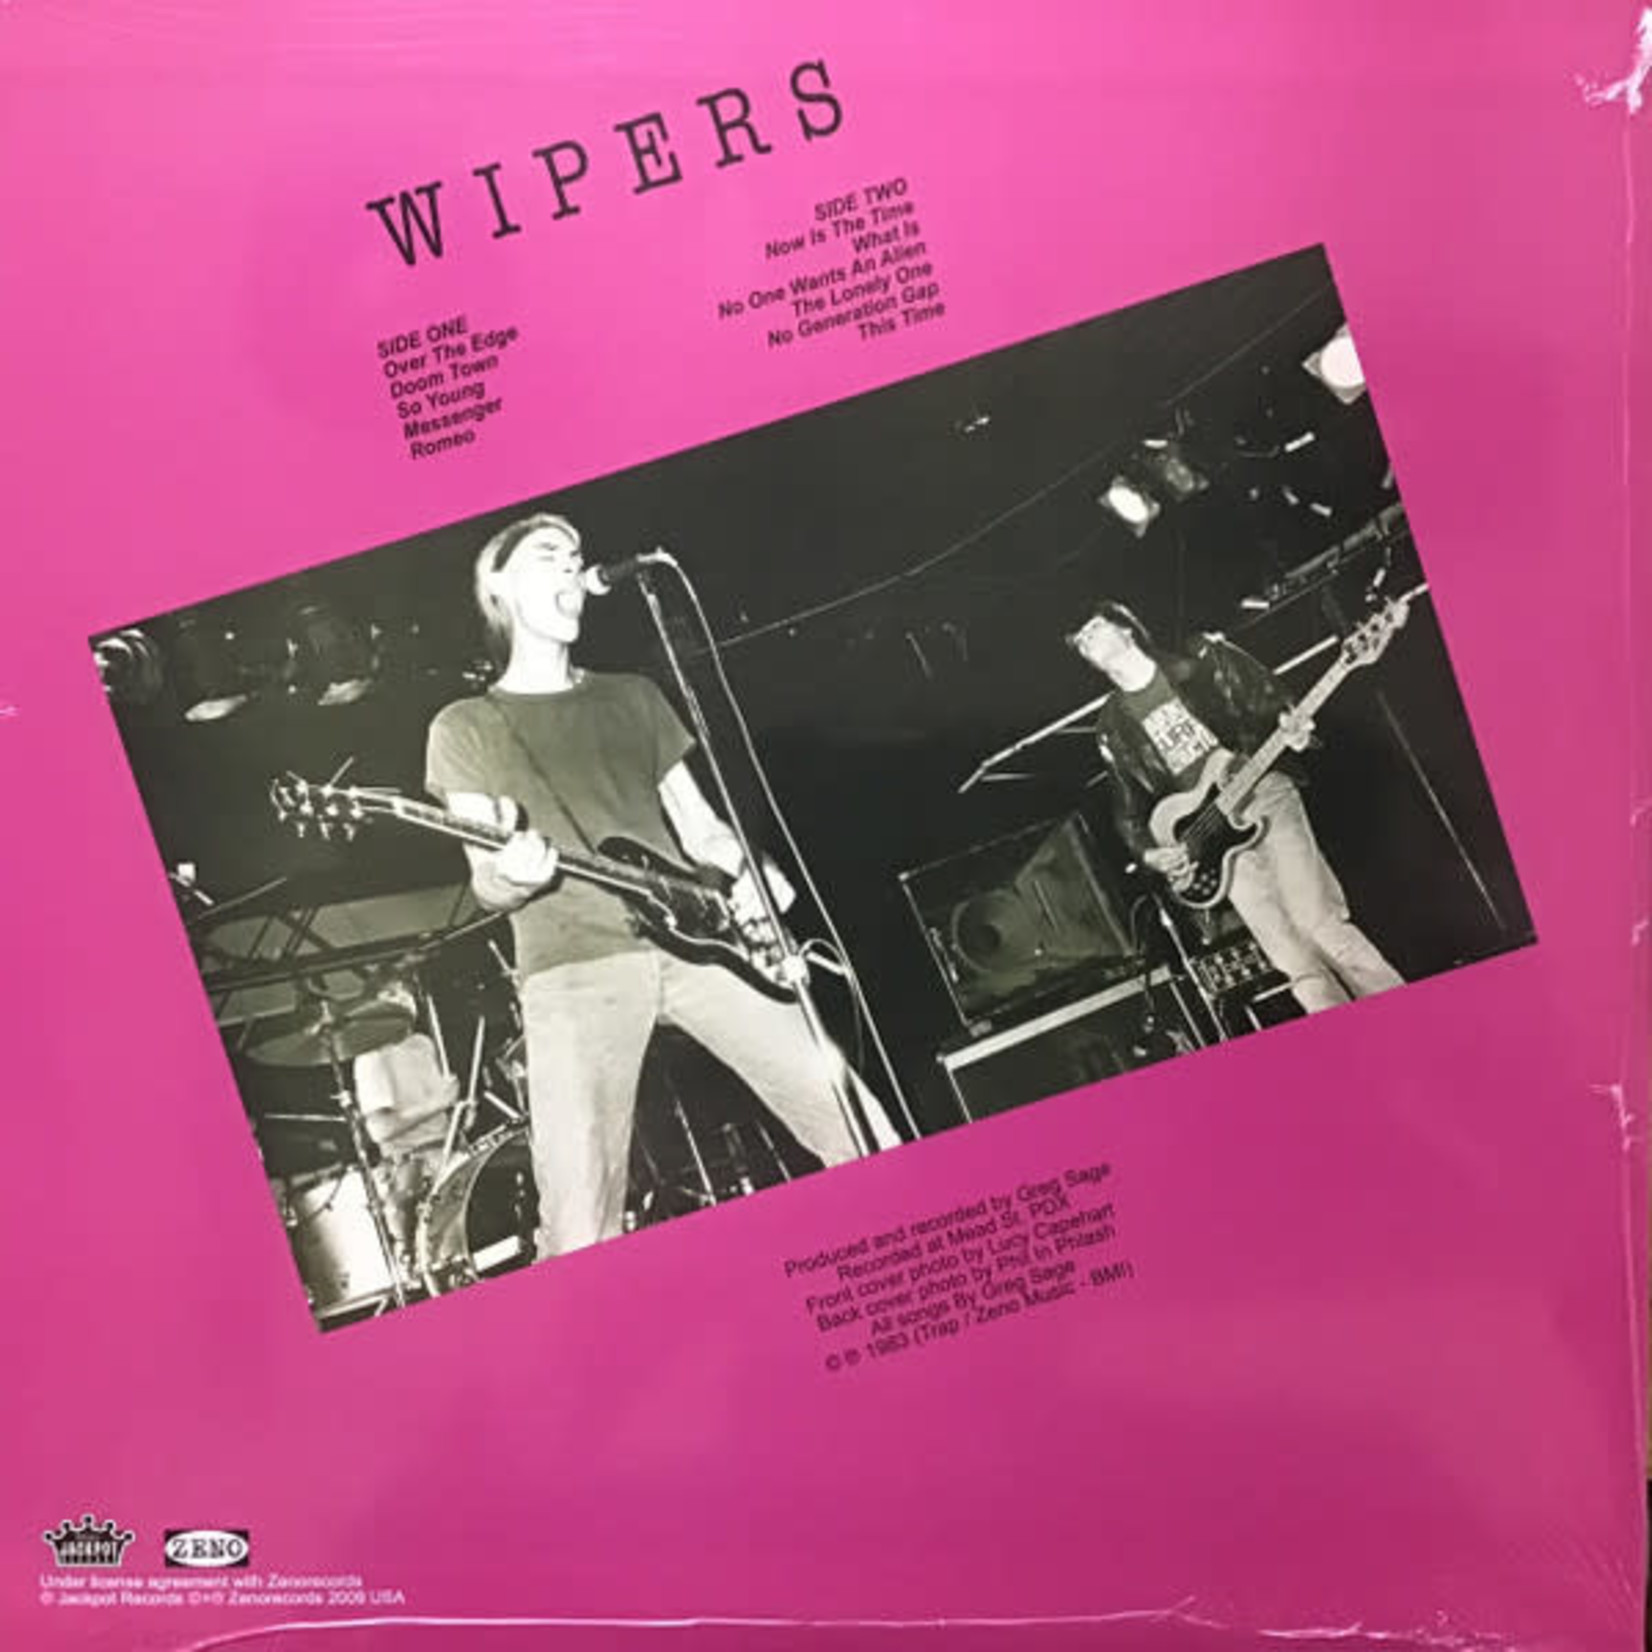 Jackpot Wipers - Over The Edge (LP)